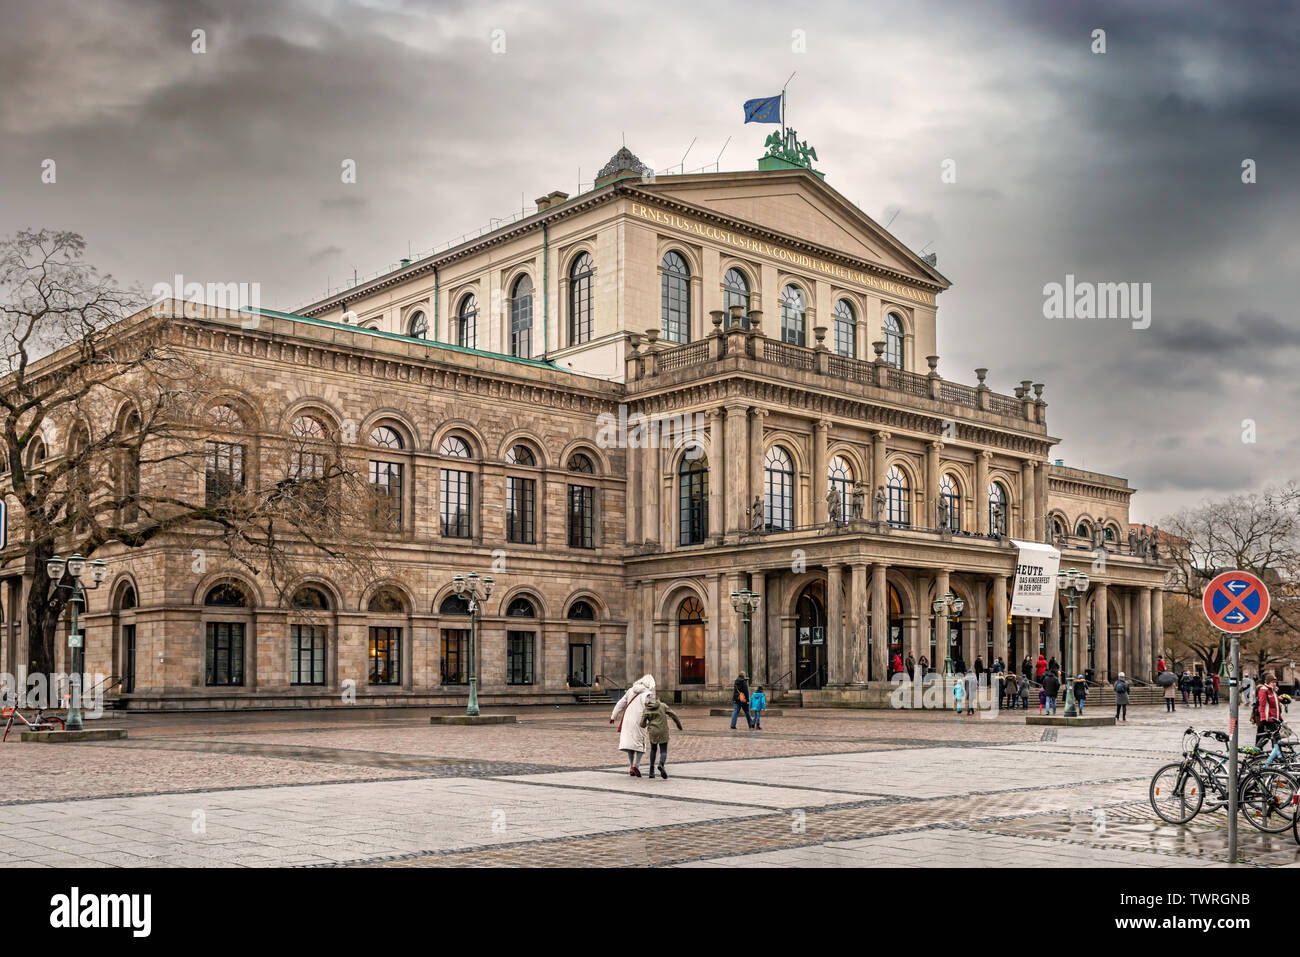 Hannover, Germany - Jan 27, 2019: View at Hannover opera house is a Neo Classical style building in the centre of the city, Germany. Stock Photo